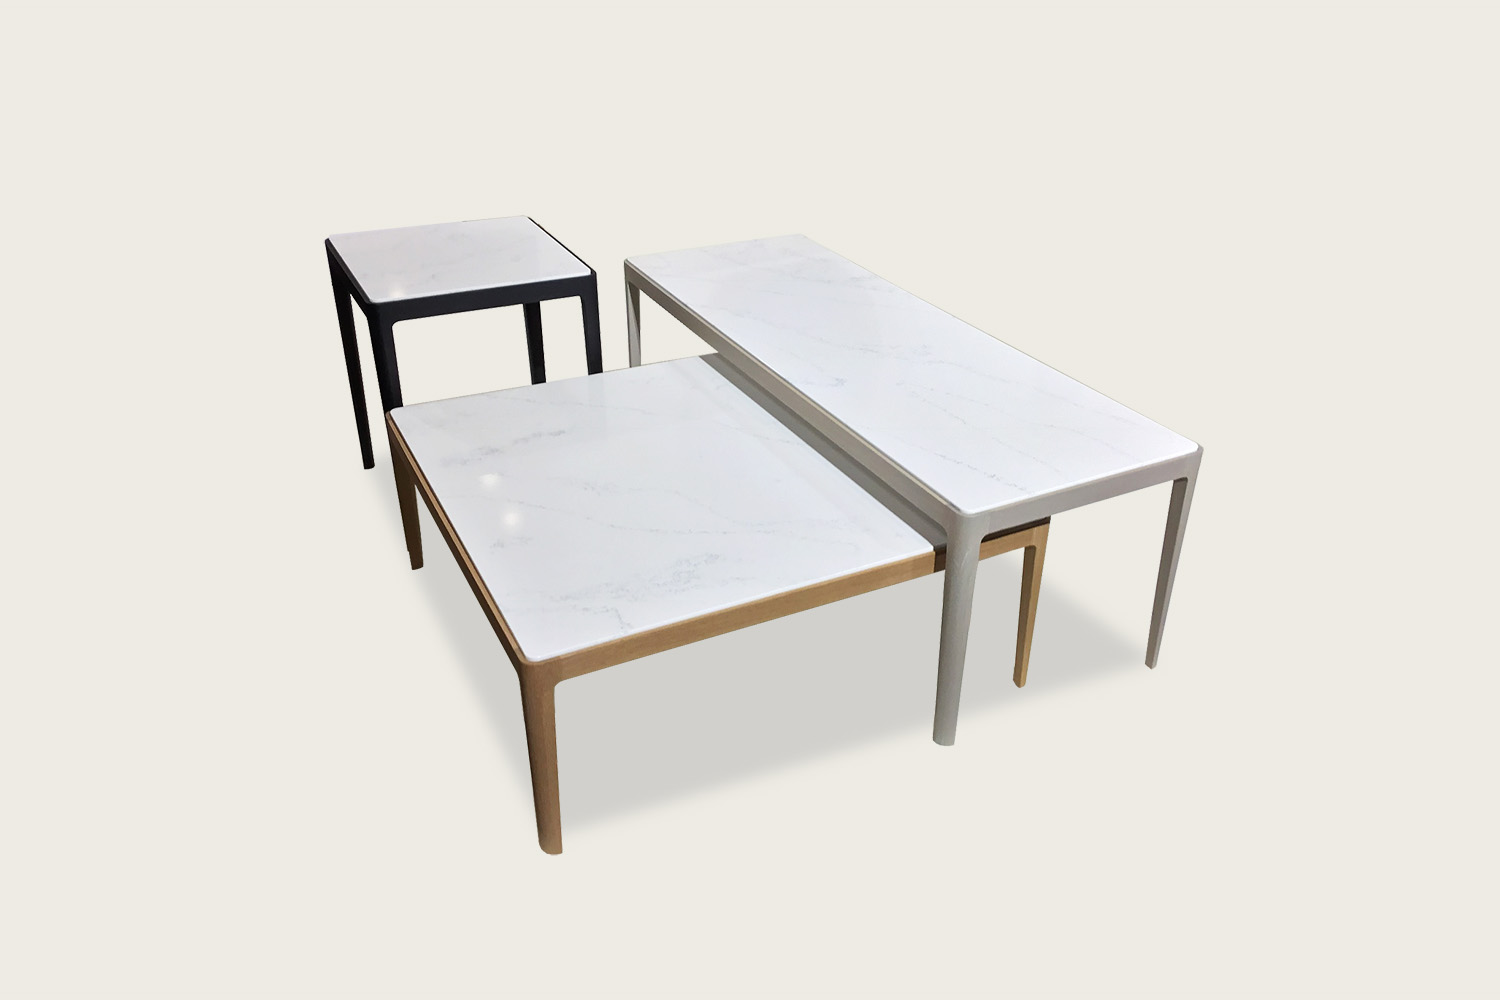 Stadia Coffee Tables in solid oak with quartz tops - Speke Klein (Copy)